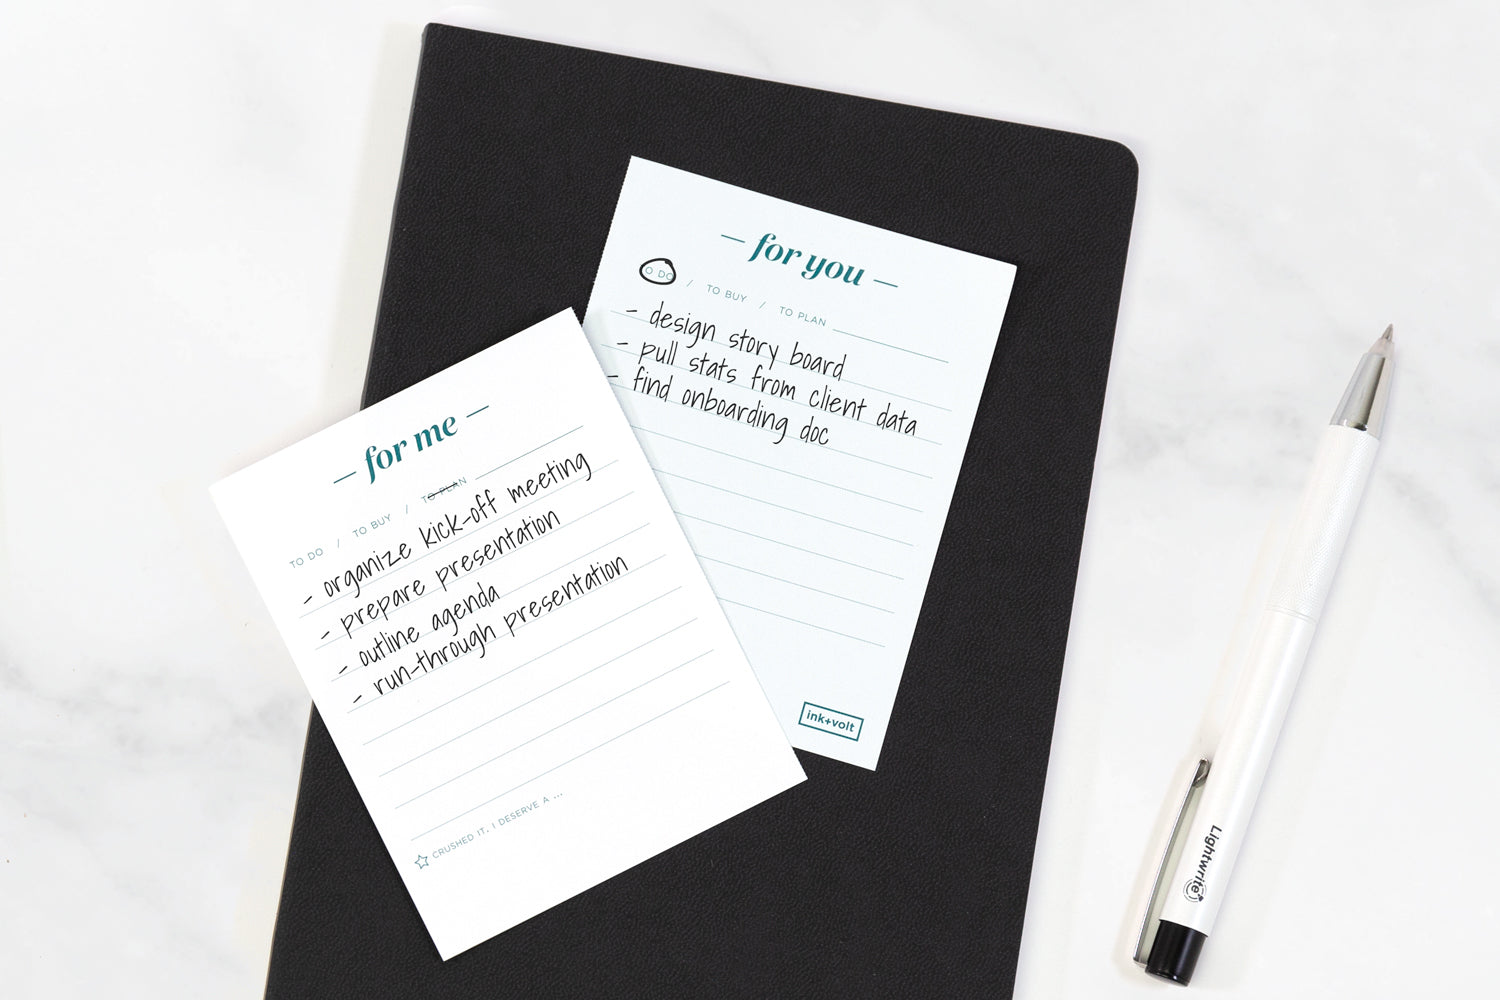 A for me/for you time management tool notepad with lists of tasks for two people, sitting on a black planner